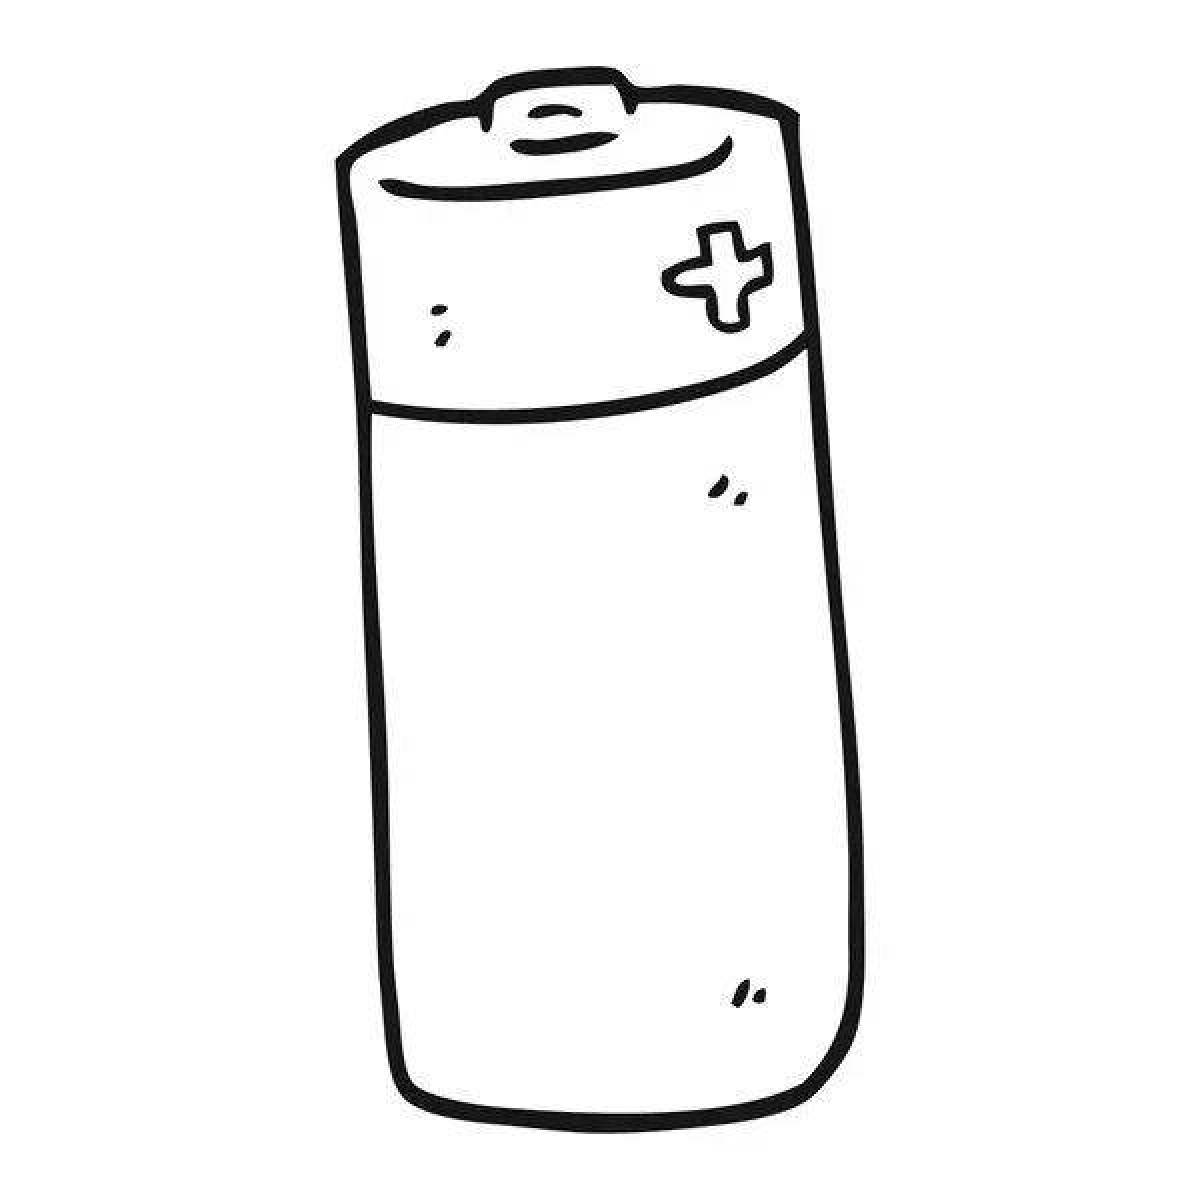 Creative battery coloring page